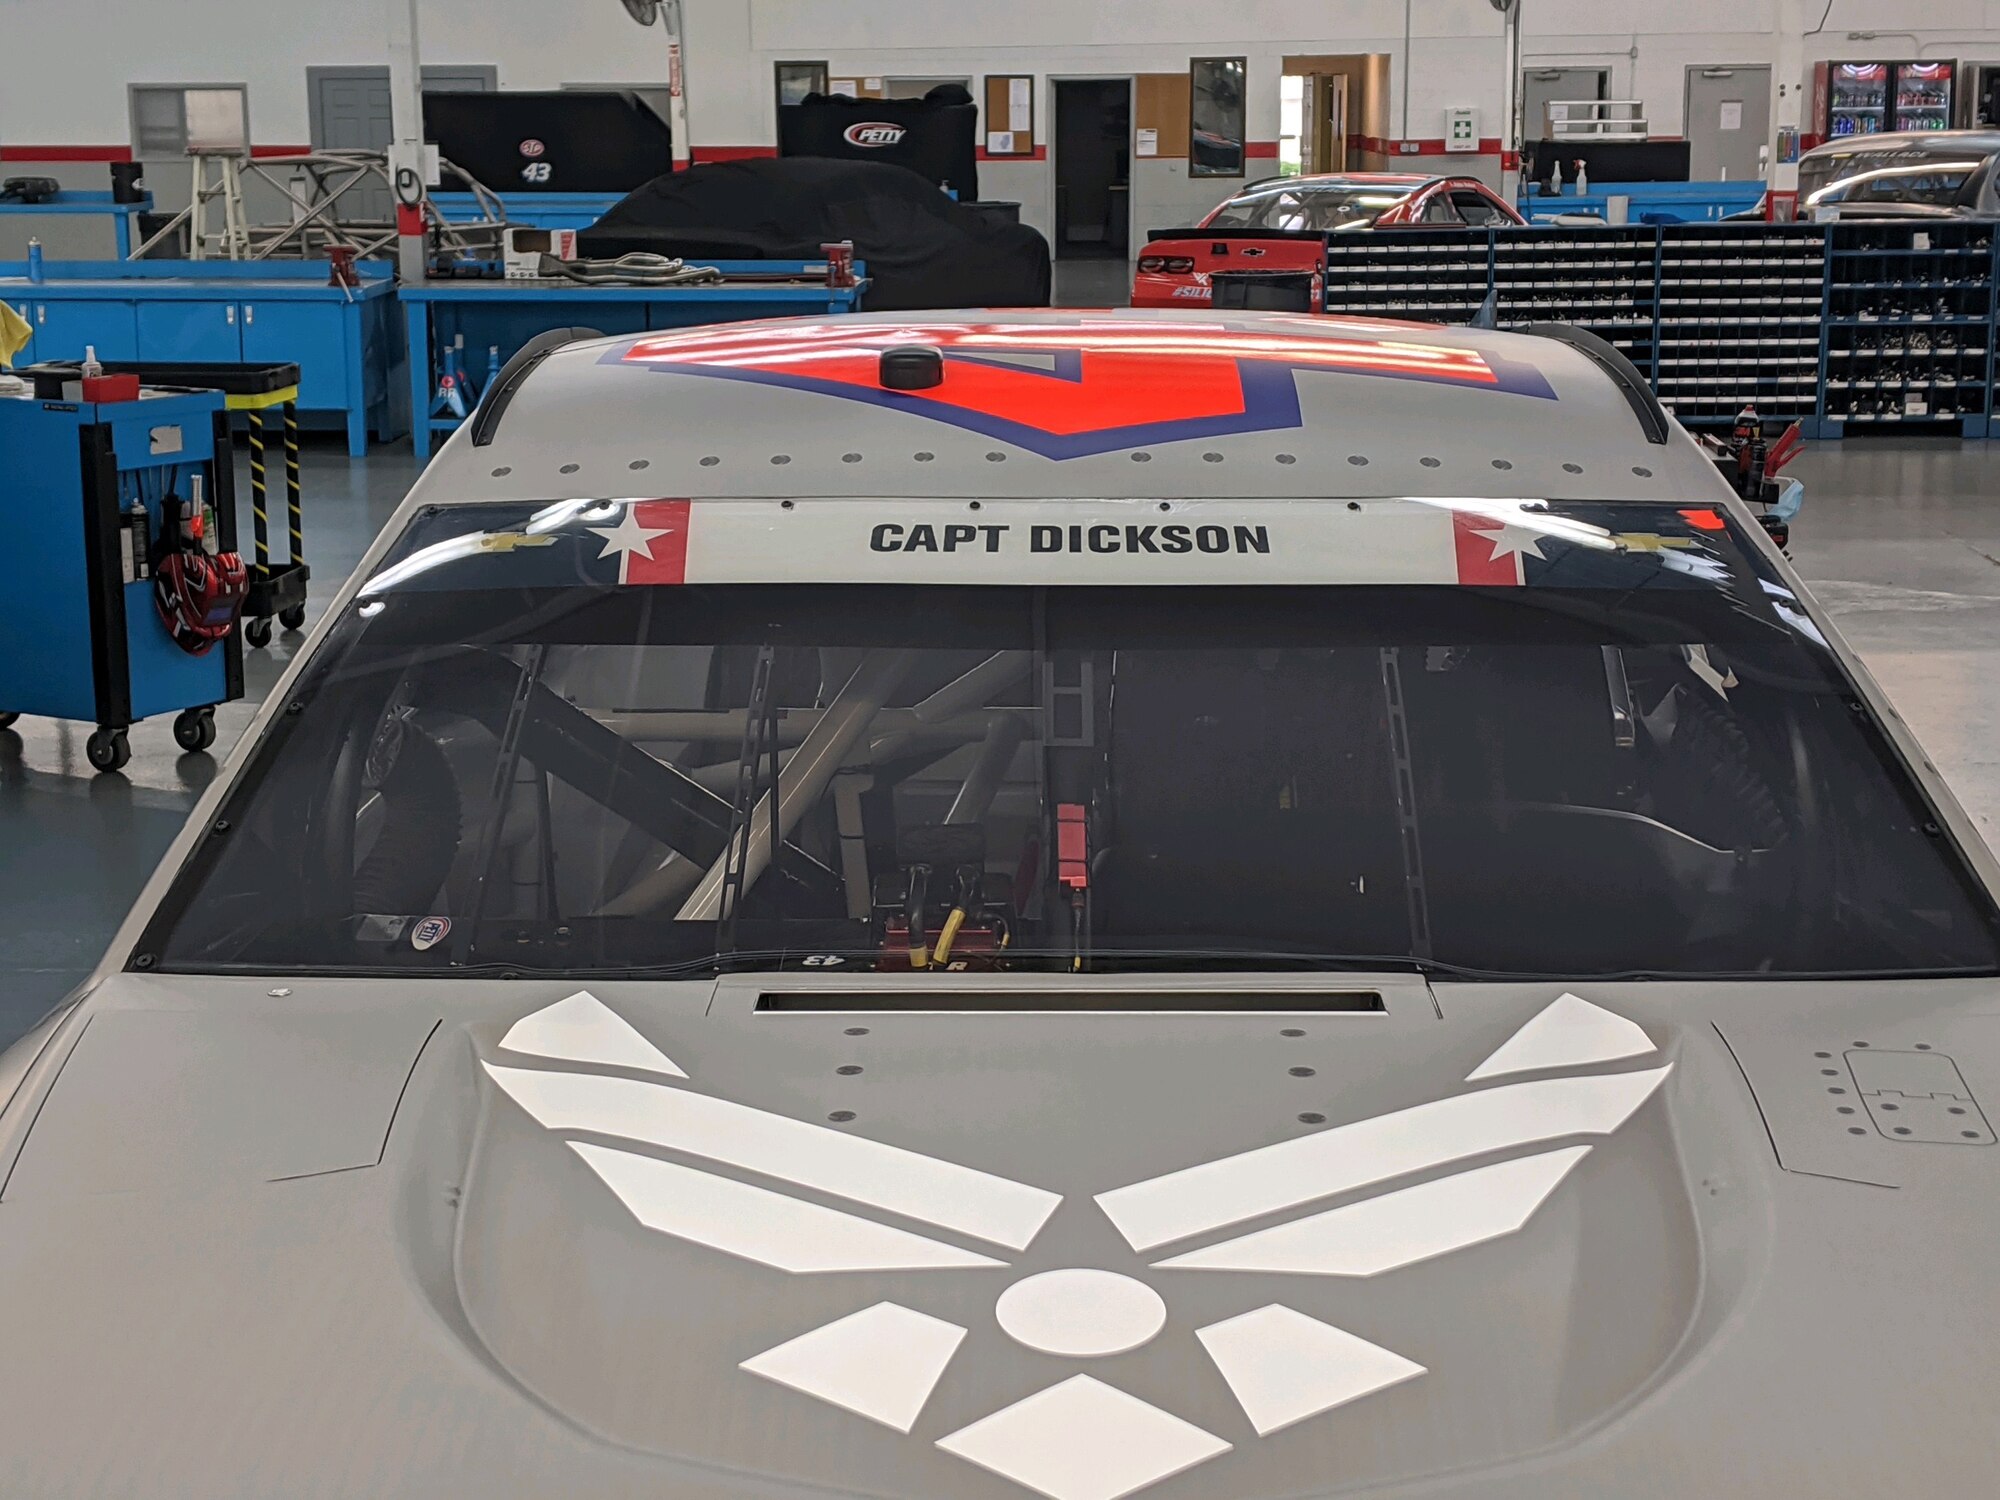 A decal on the windshield of Richard Petty Motorsports No. 43 car honoring Capt. Lawrence E. Dickson, an American hero and fallen Tuskegee Airman.